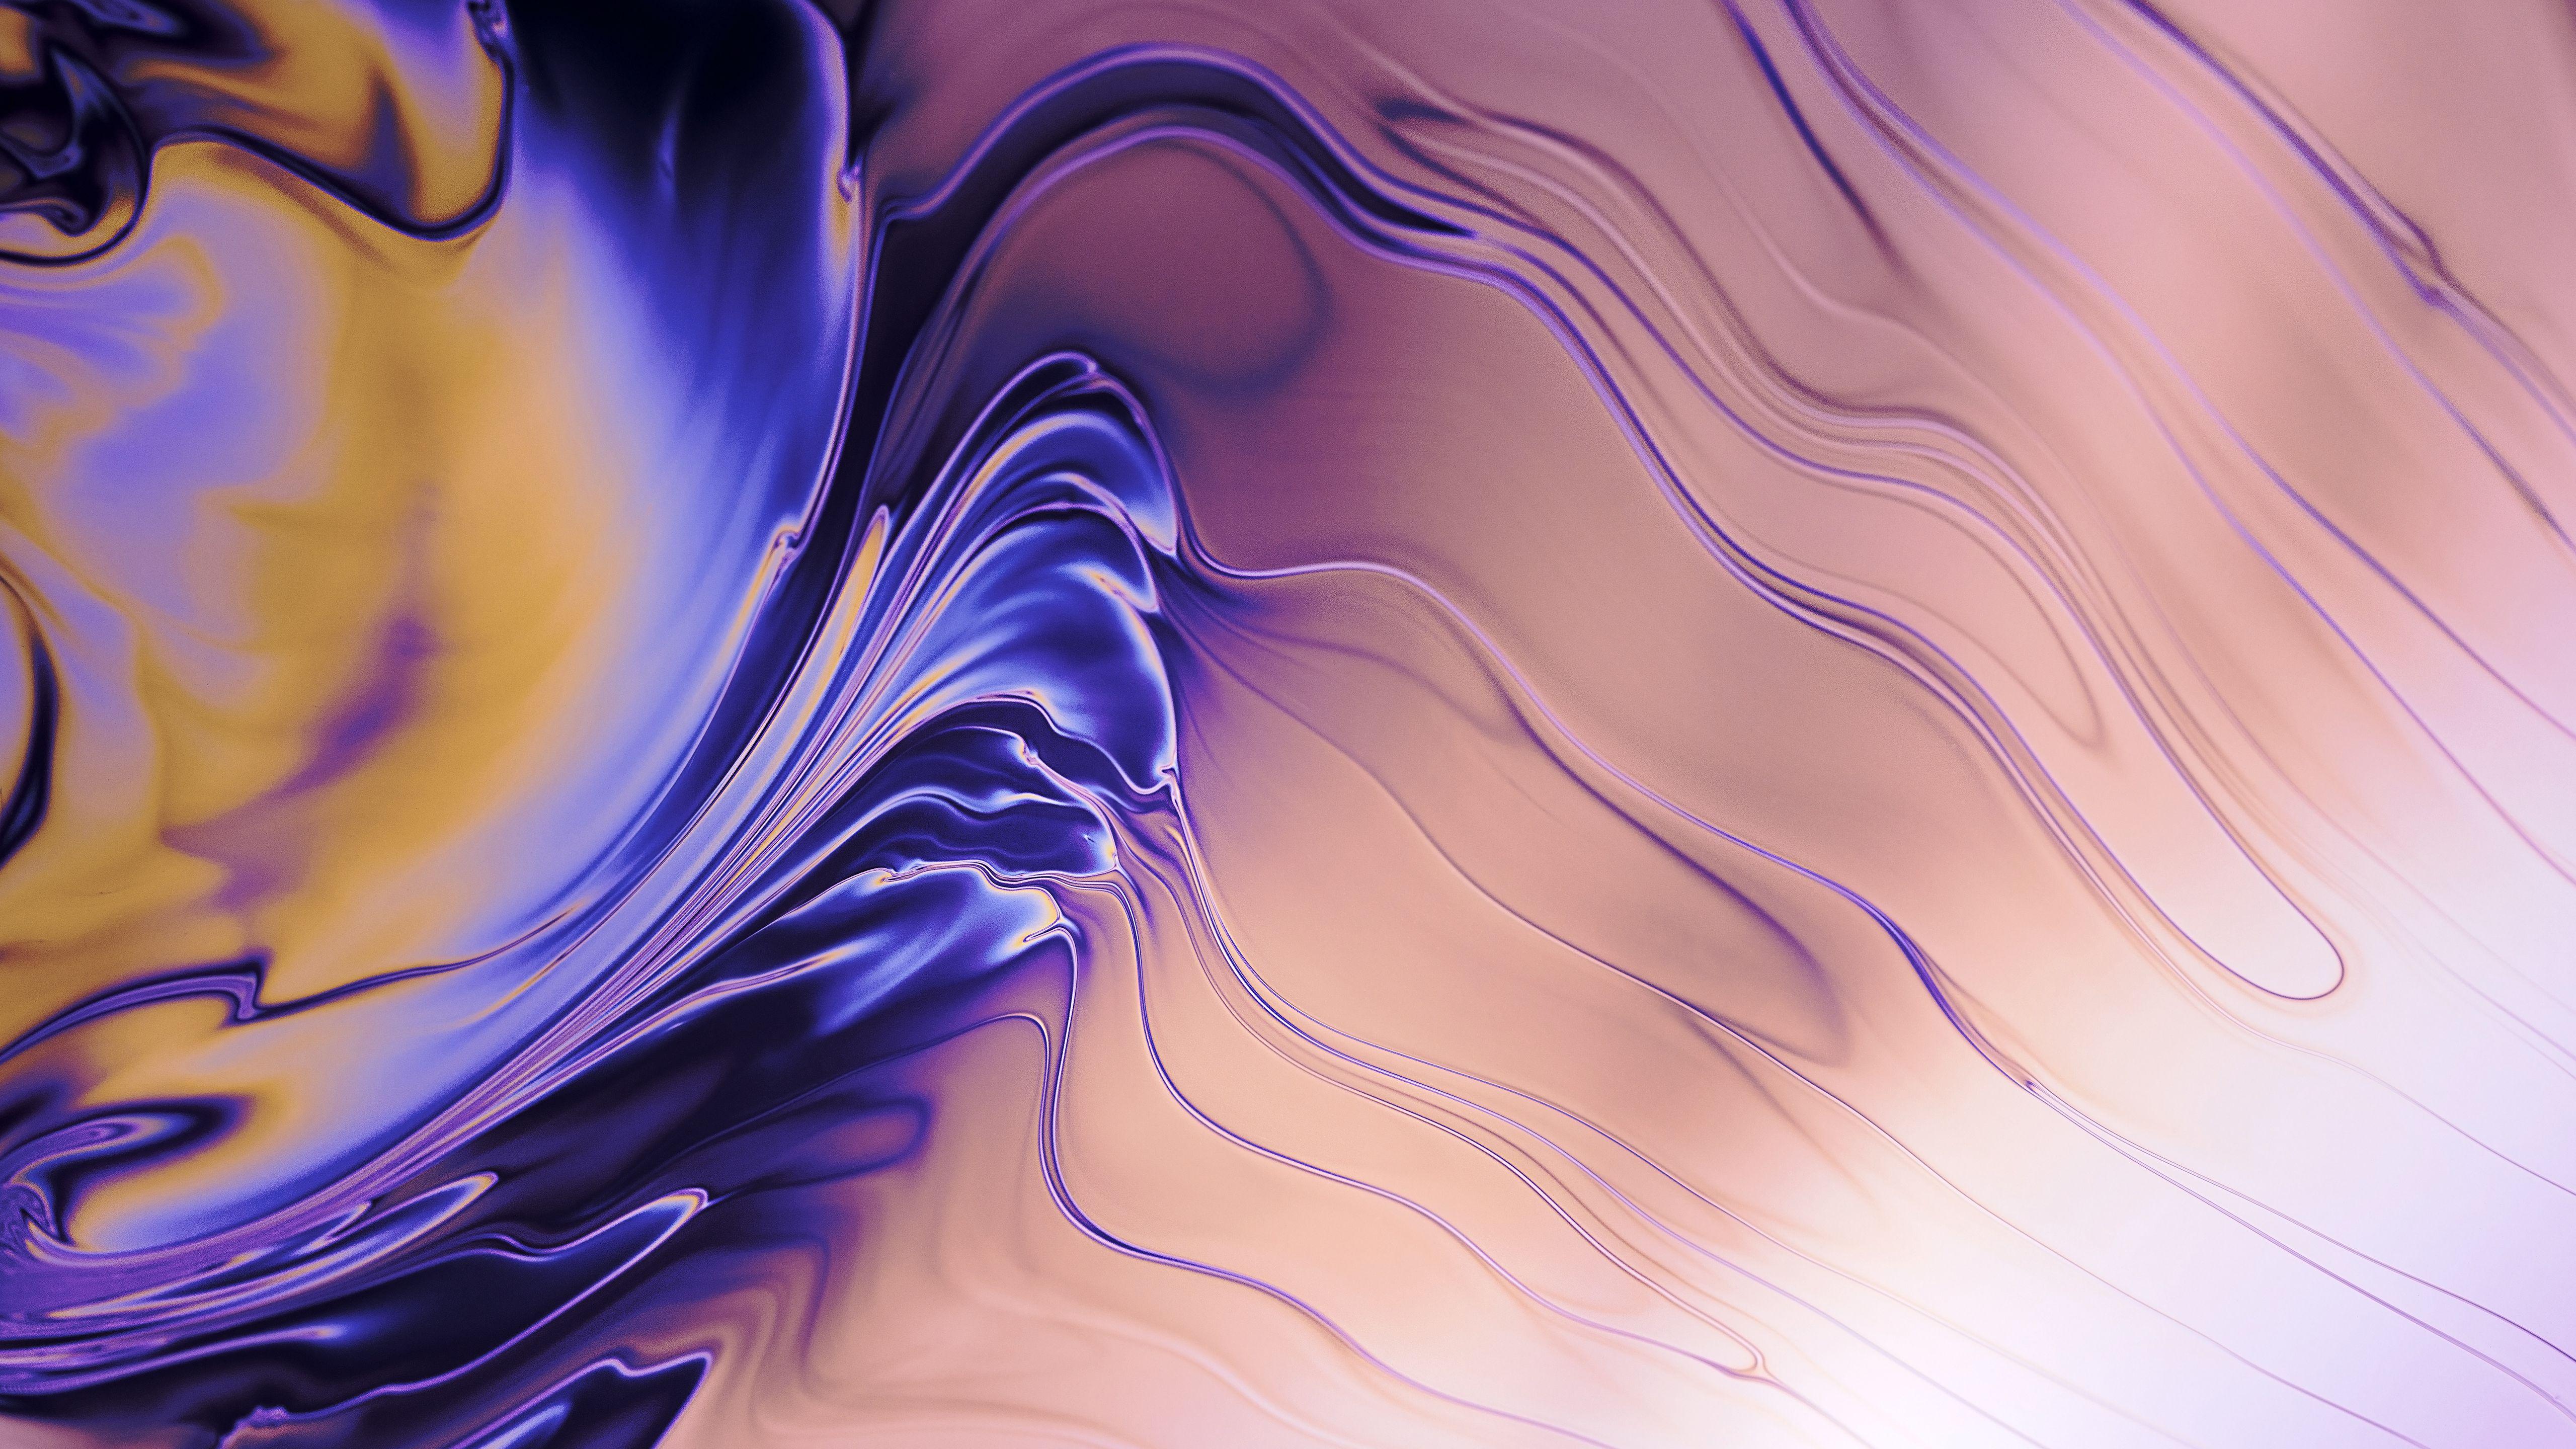 Abstract Liquid Wallpapers - Top Free Abstract Liquid Backgrounds